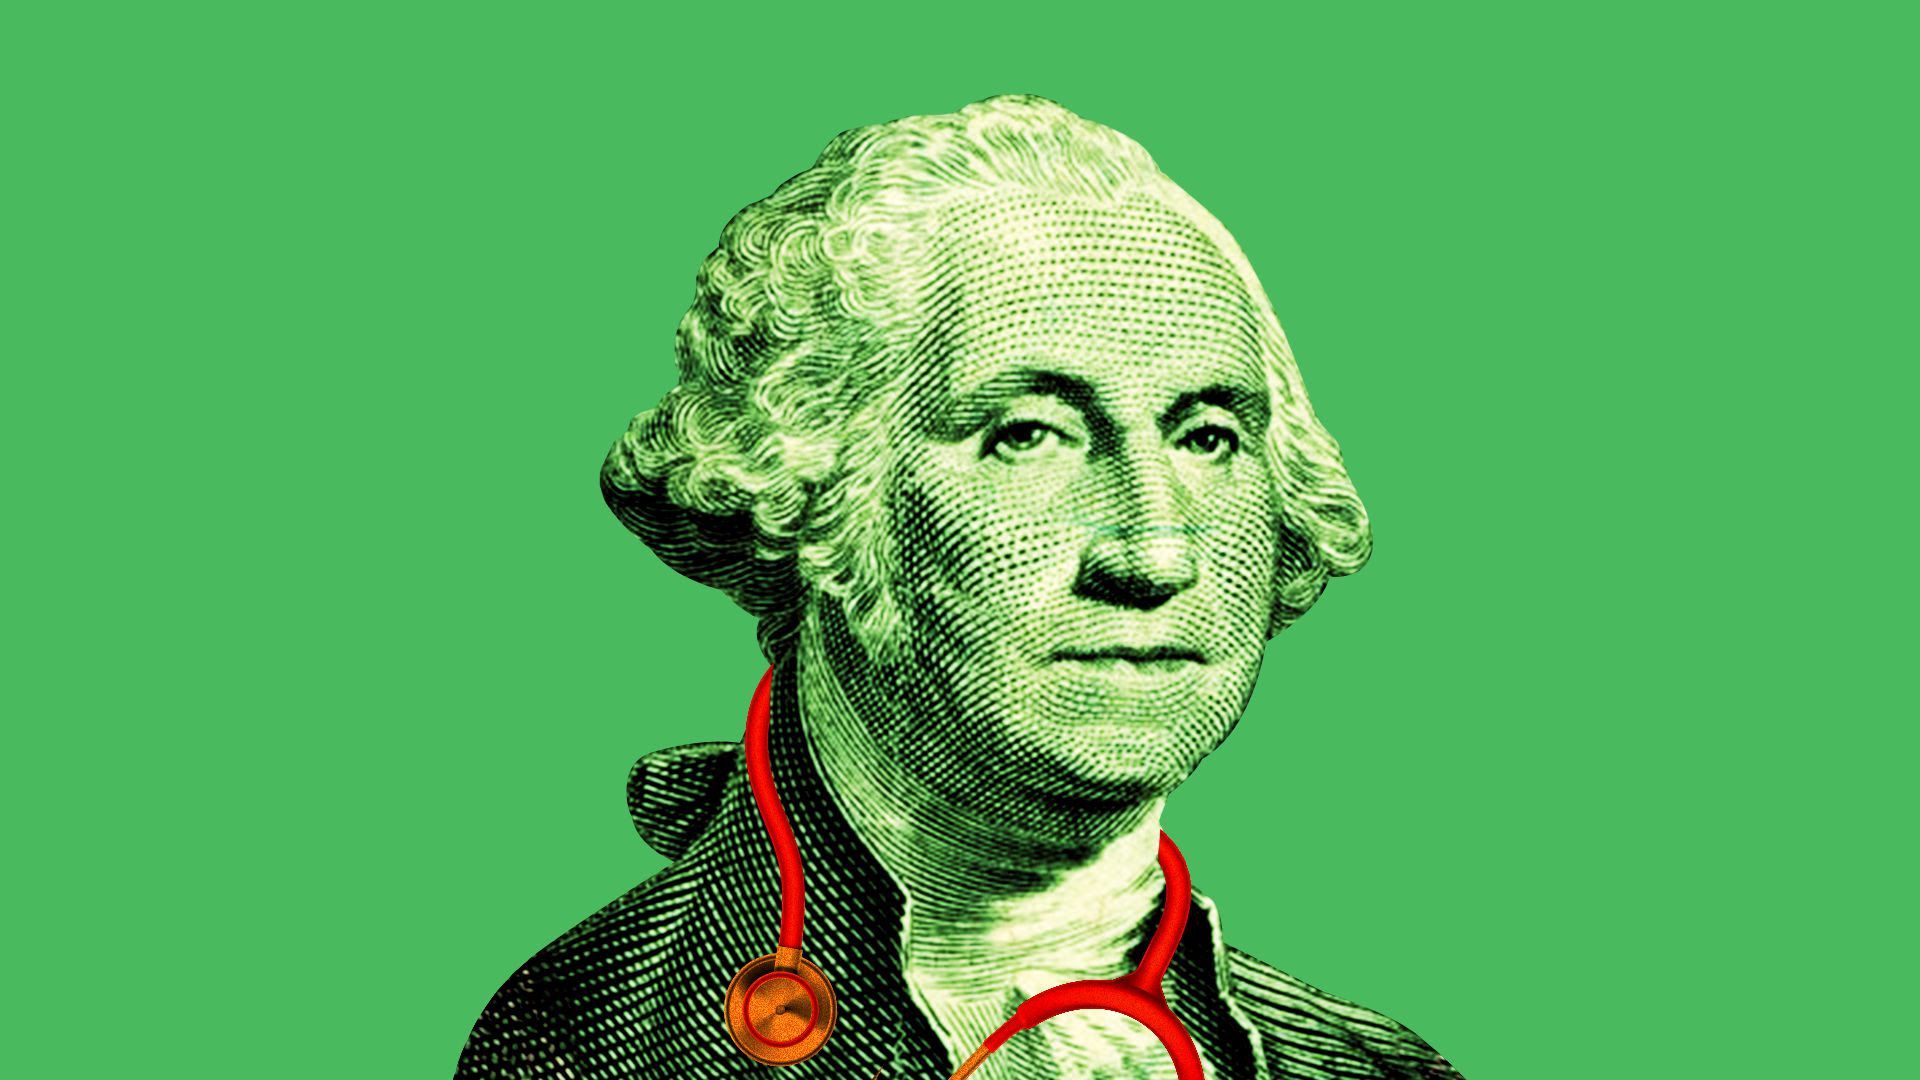 Dollar bill version of George Washington with a stethoscope around his neck 